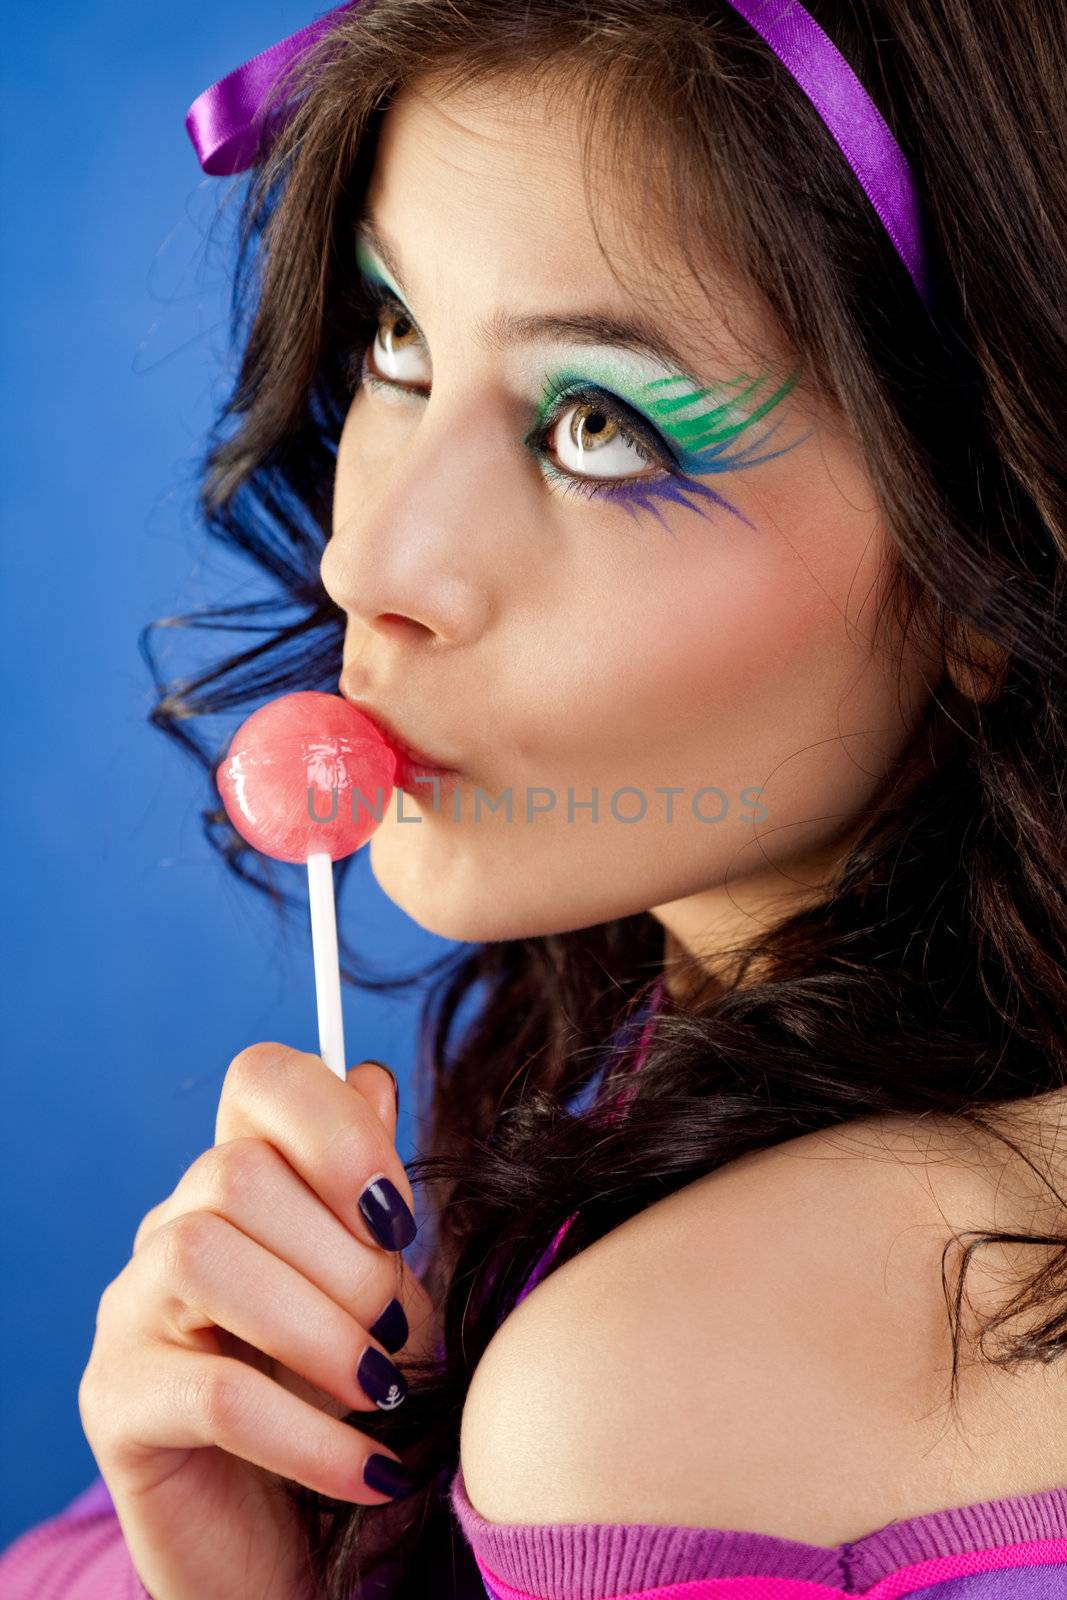 beautiful girl colourfull make-up licking lollipop looking up